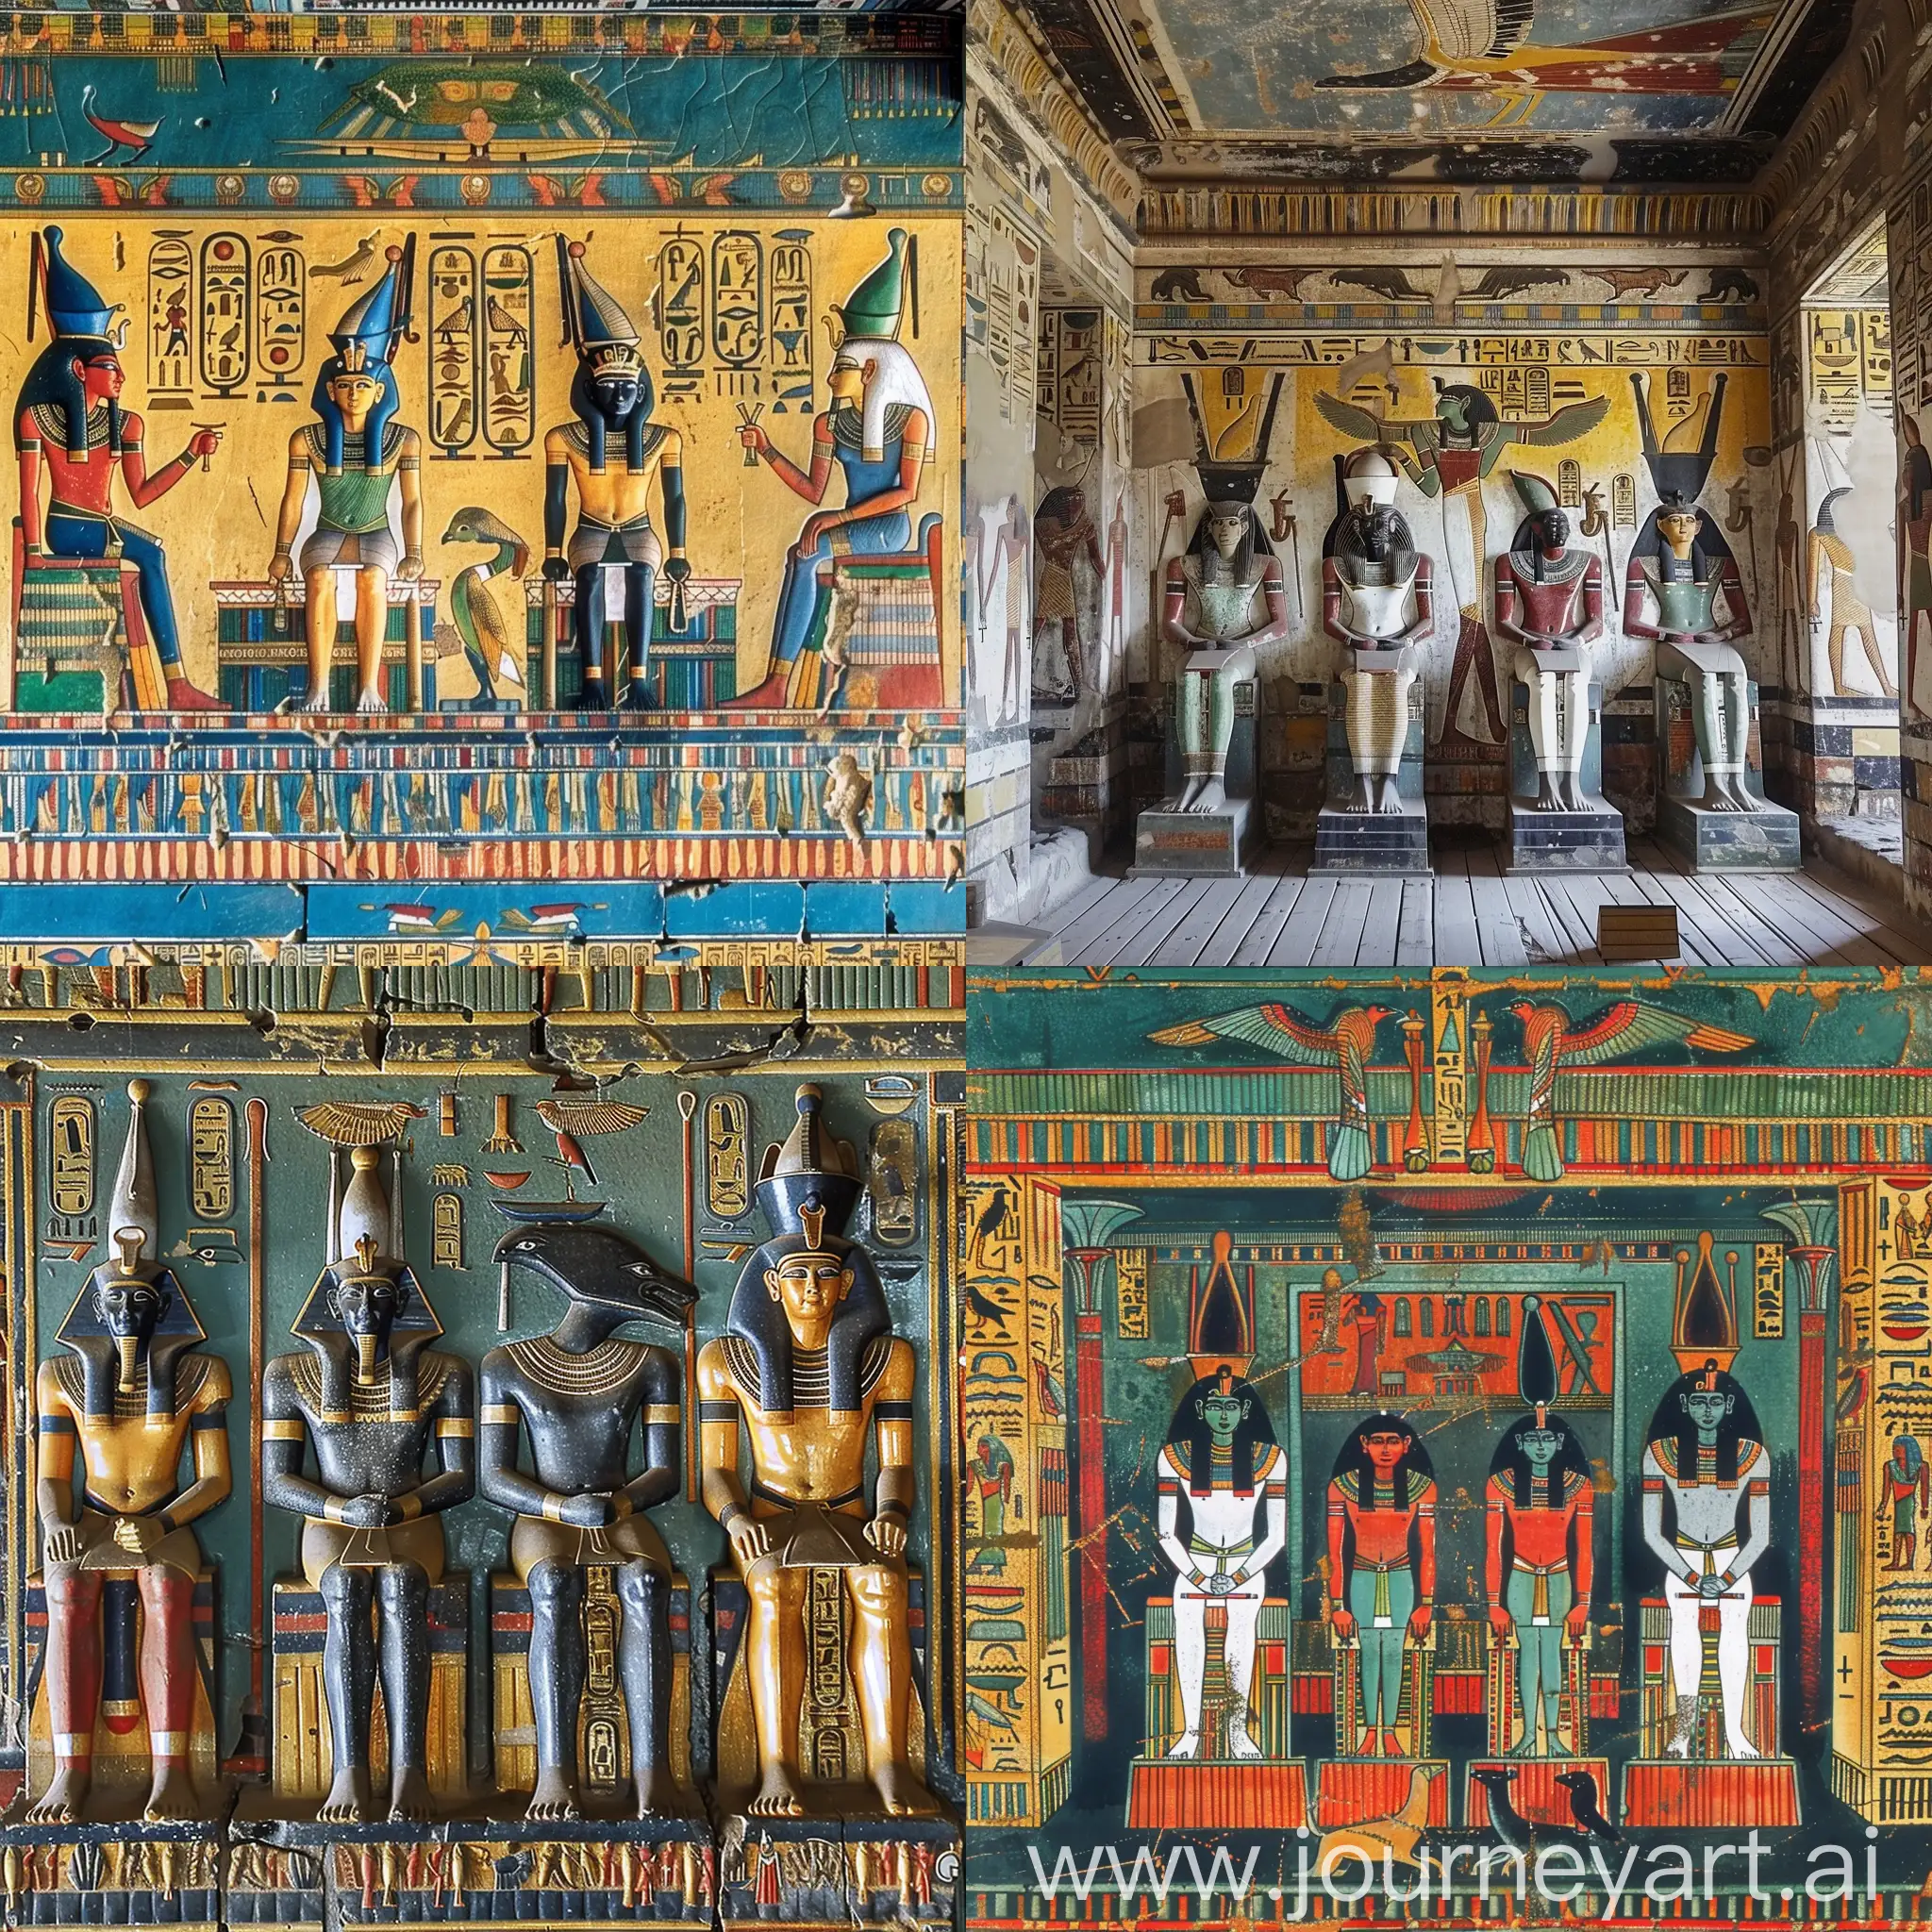 four Egyptian gods are sitting on their thrones,
two before, two behind,

the first one at left behind is God Shu,
the second one at left before is Goddess Tefnut,
the third one at right before is Goddess Nut,
the fourth one at right behind is God Geb,

they are all inside a splendid Egyptian temple,